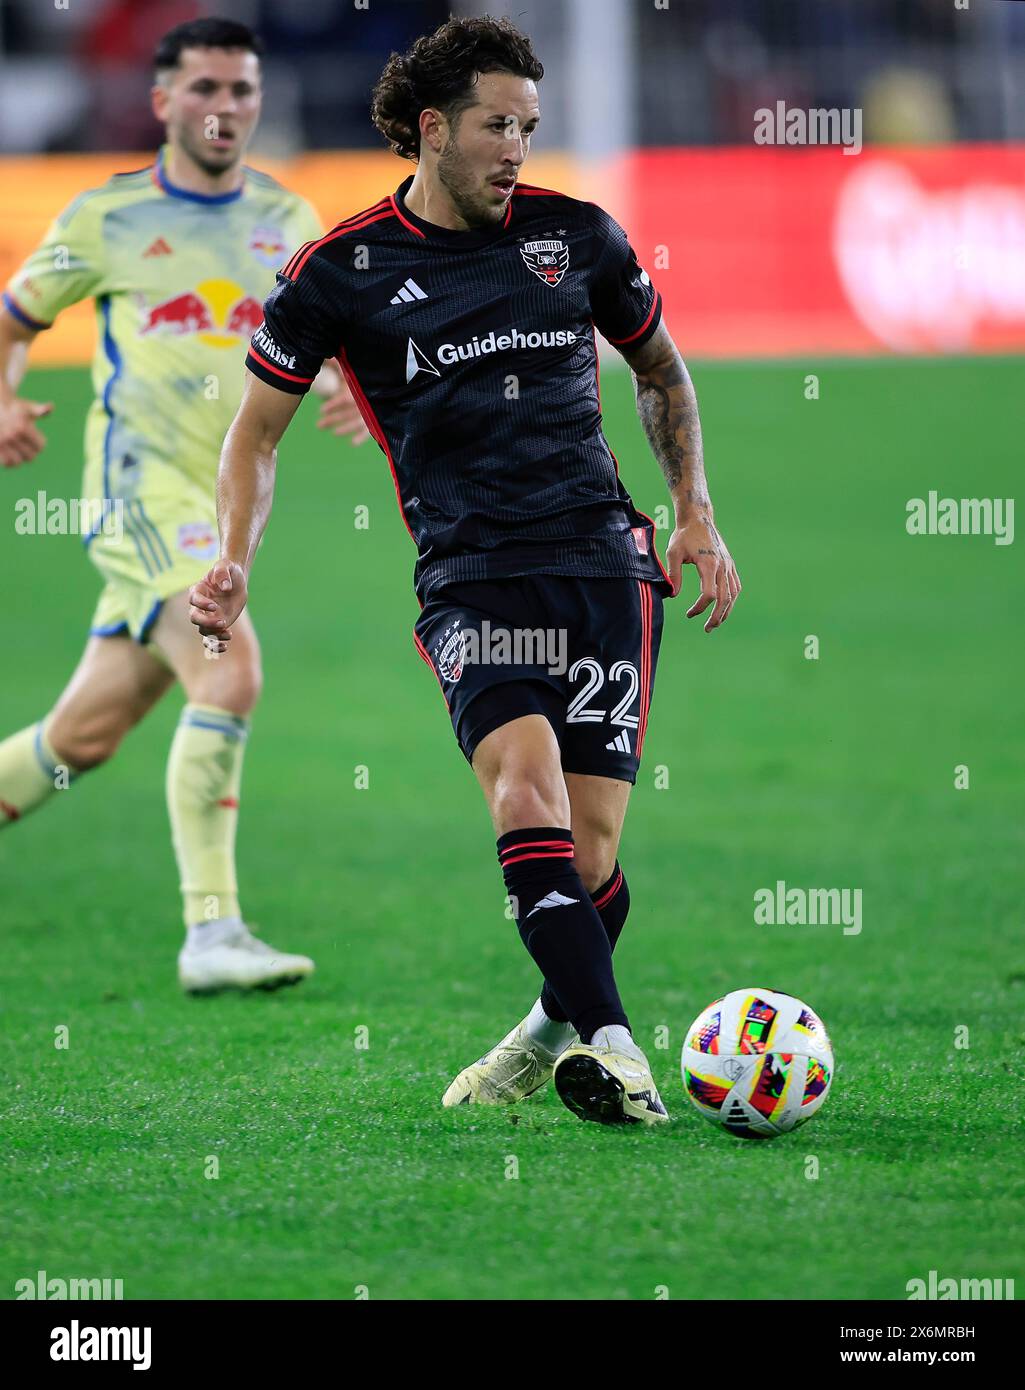 May 15, 2024: D.C. United Defender (22) Aaron Herrera passes the ball during an MLS soccer match between the D.C. United and the New York Red Bulls at Audi Field in Washington DC. Justin Cooper/CSM (Credit Image: © Justin Cooper/Cal Sport Media) Stock Photo